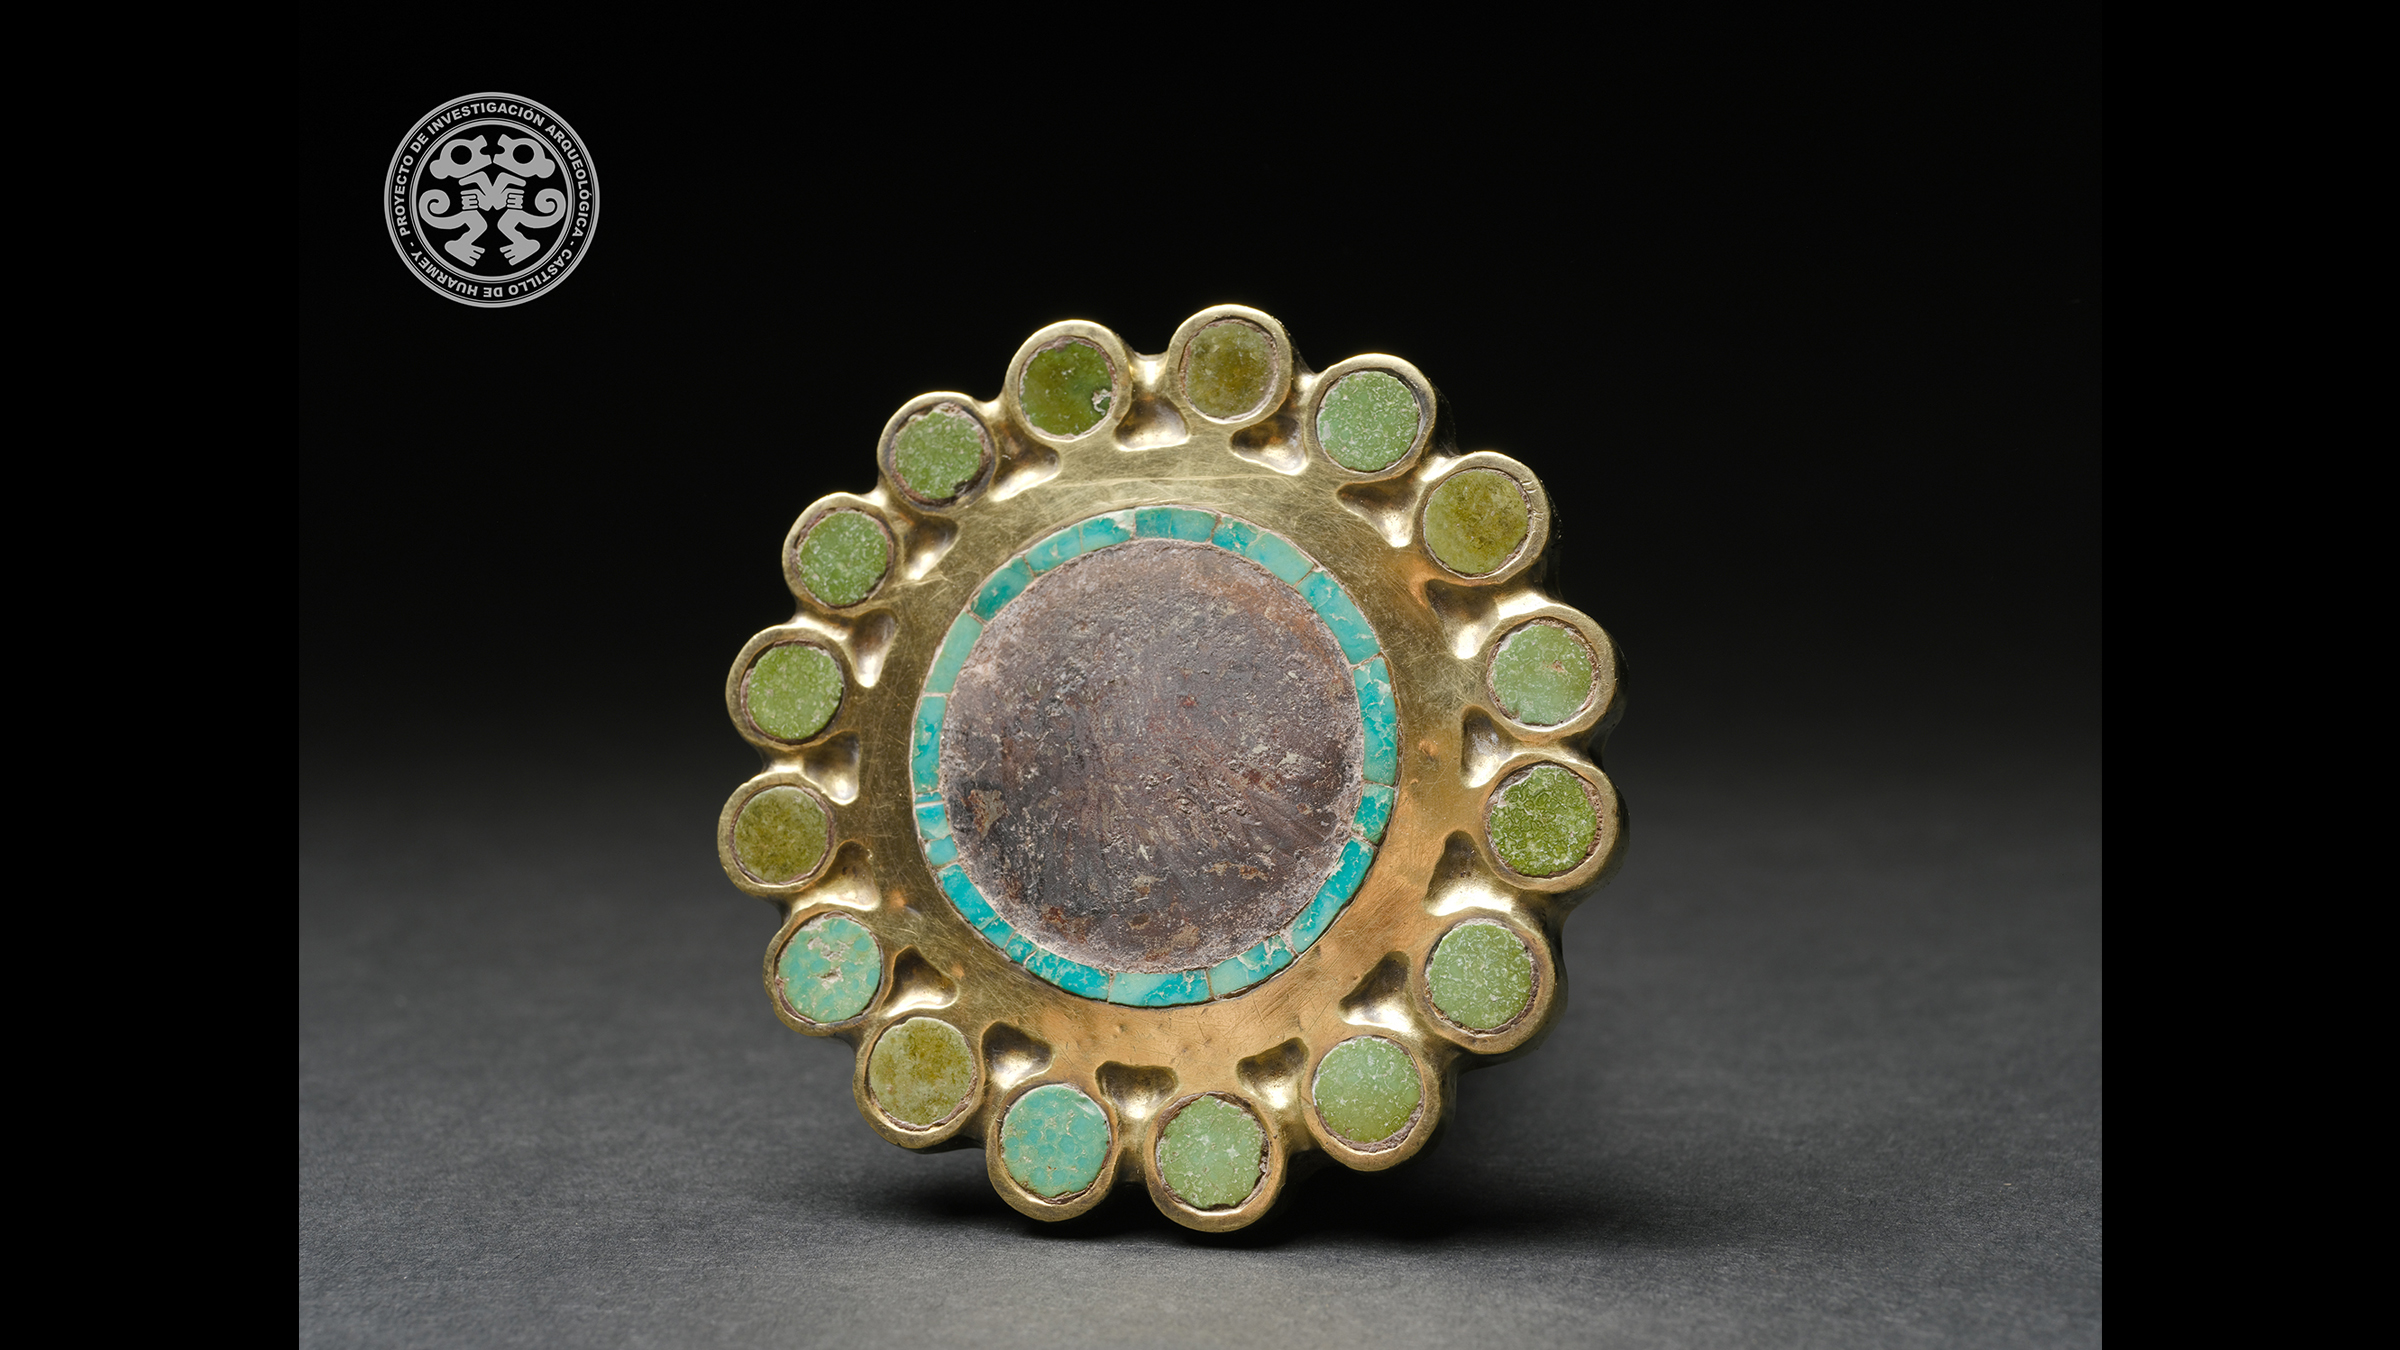 Many decorated artifacts in various stages of completion were found in the tomb, including this ear ornament made of gold and inlaid with semi-precious stones.